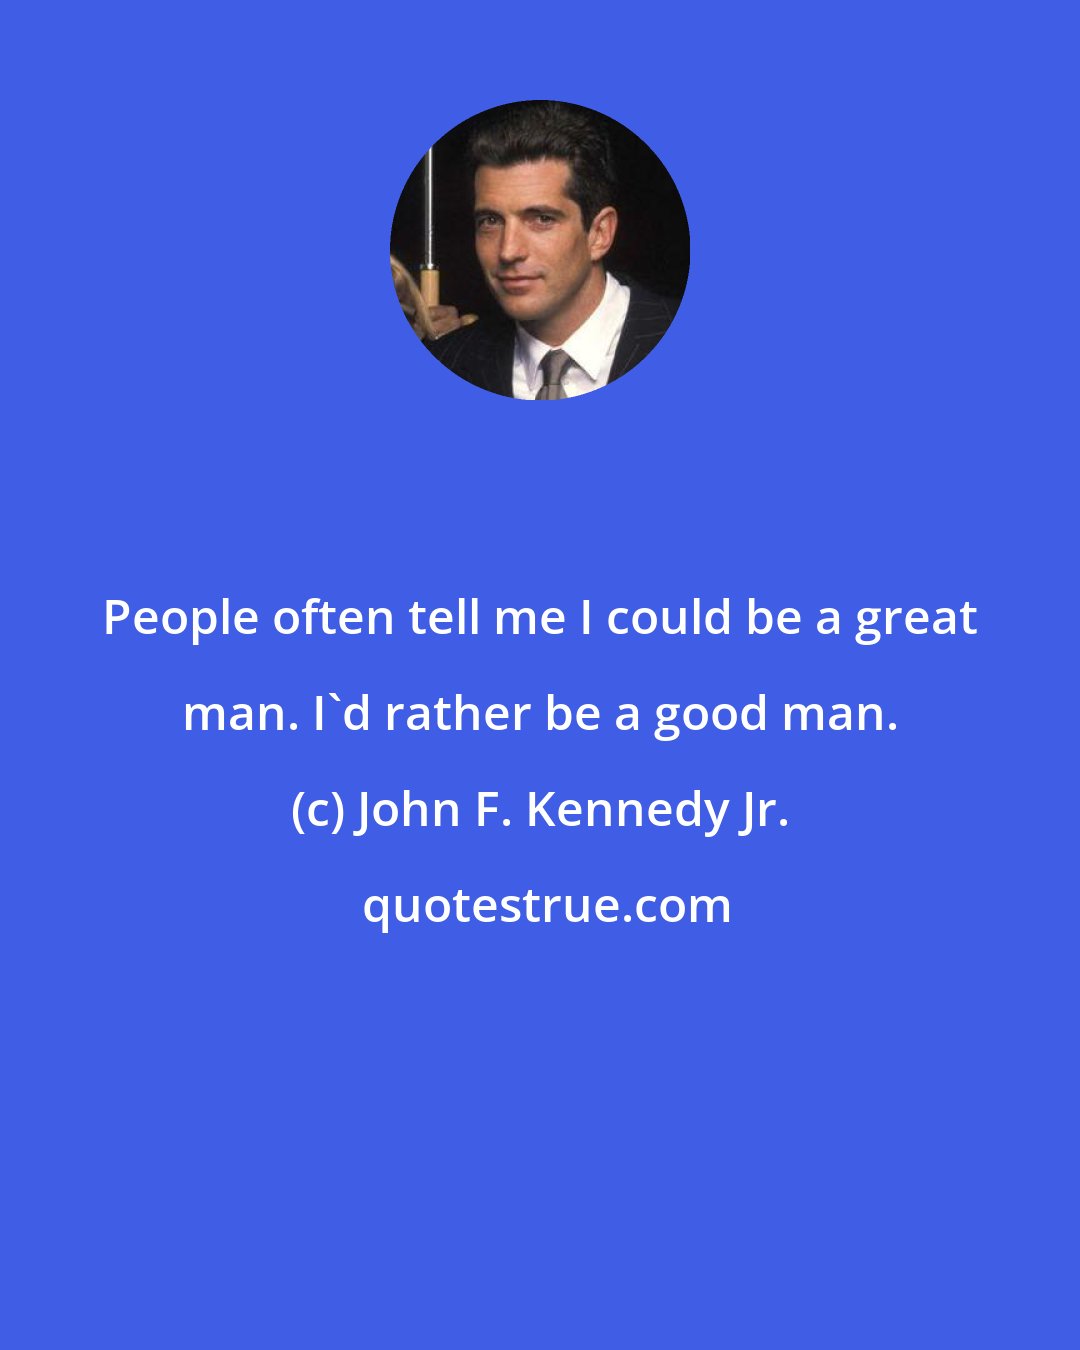 John F. Kennedy Jr.: People often tell me I could be a great man. I'd rather be a good man.